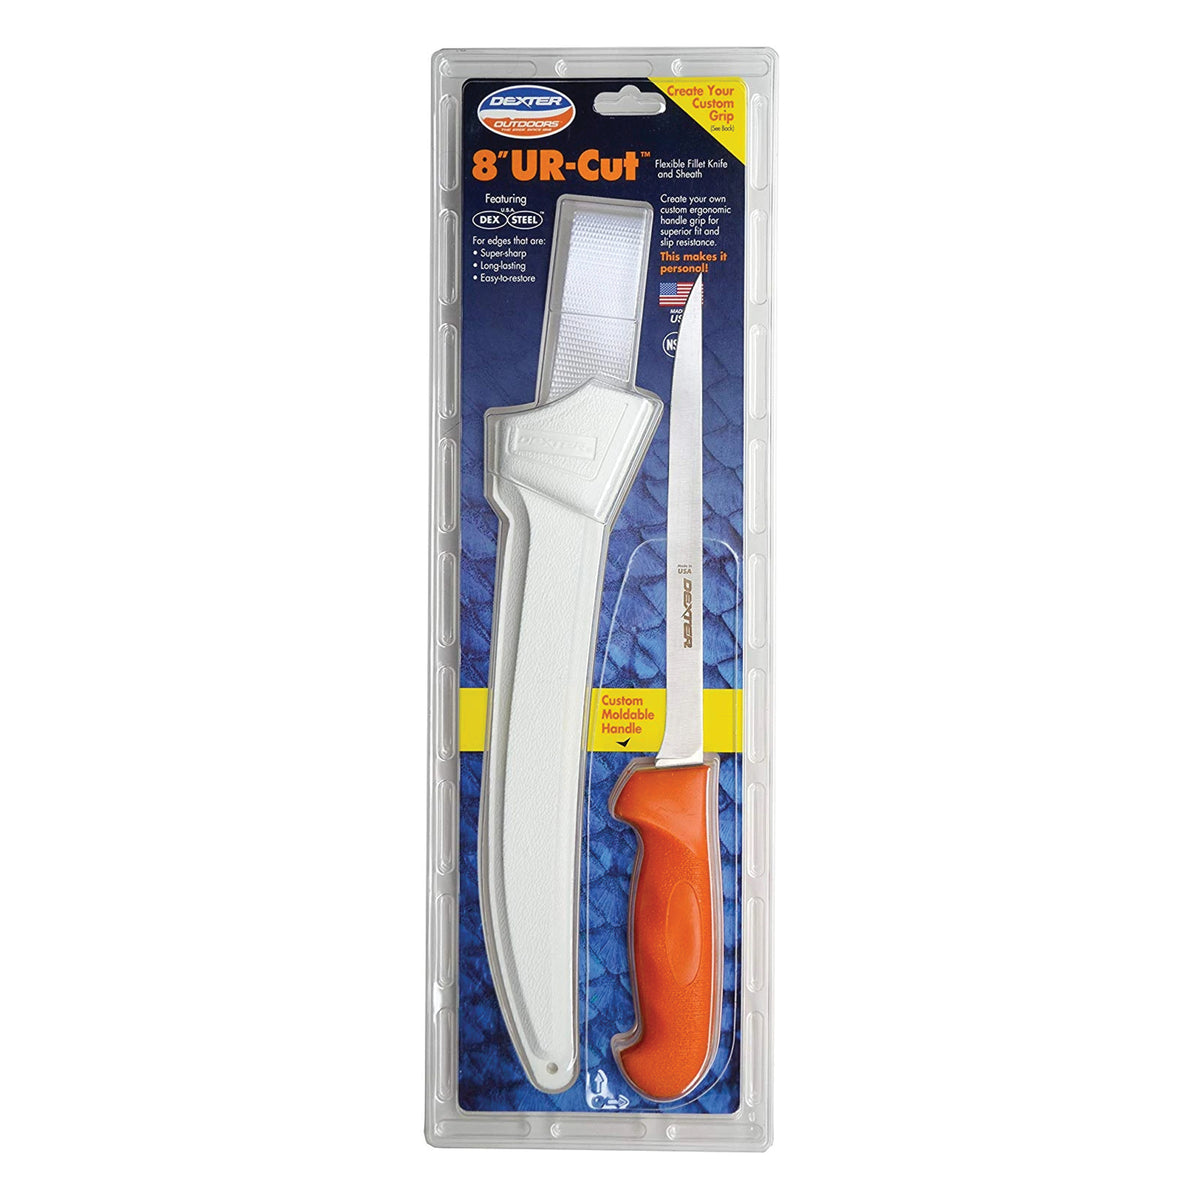 Dexter-Russell 8-Inch Narrow Filet Knife with Sheath - Bunzl Processor  Division